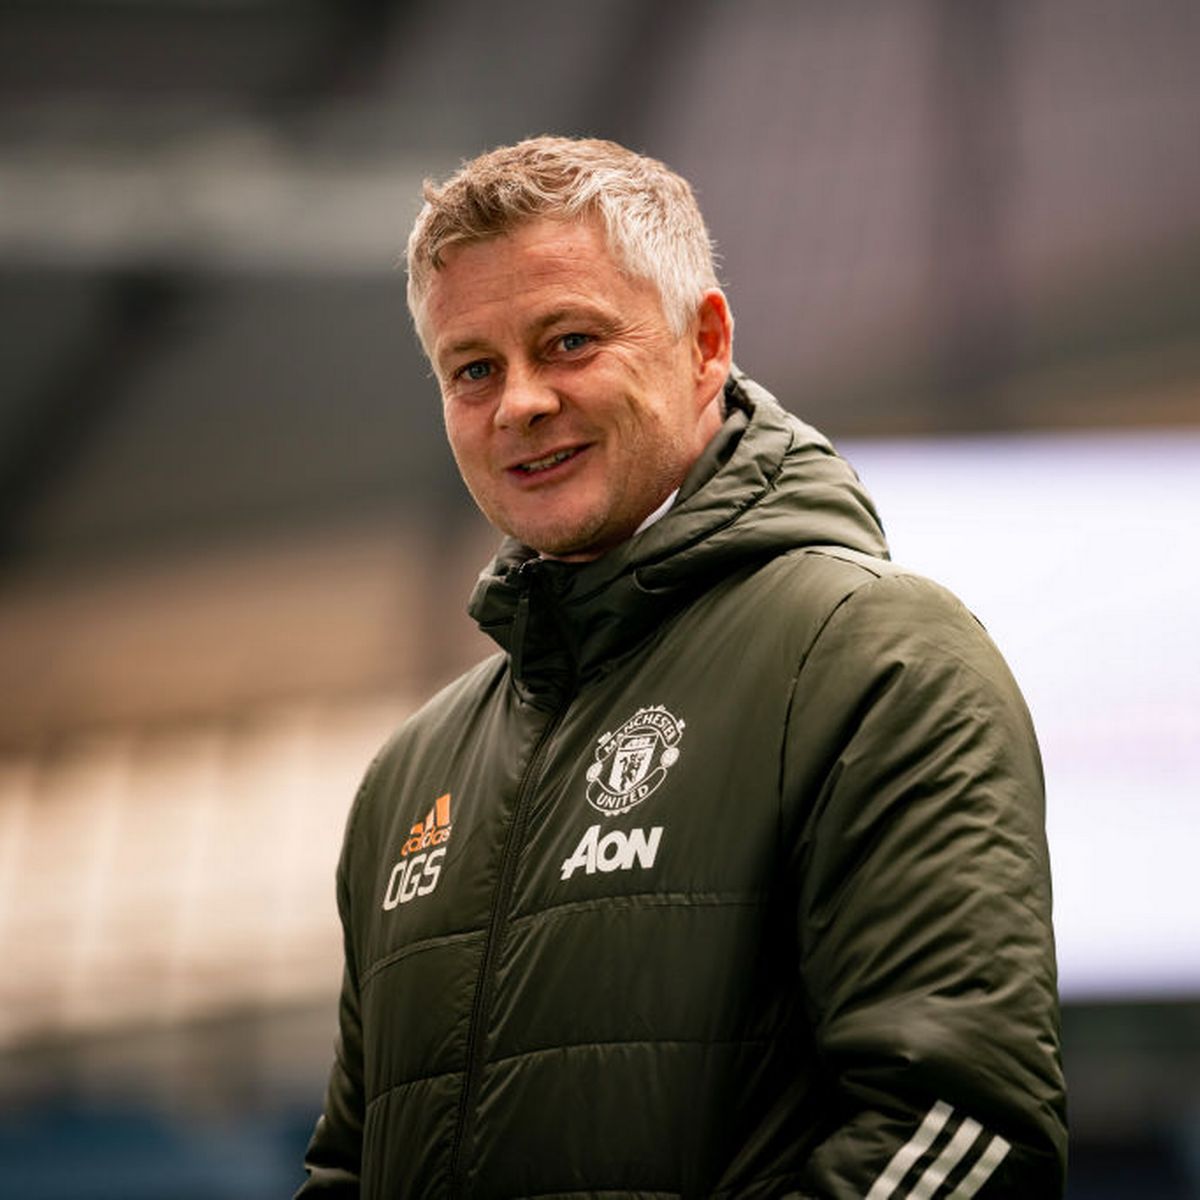 39. Since Solskjaer took charge of the club, no team has ever completed the double in the PL against Manchester United.